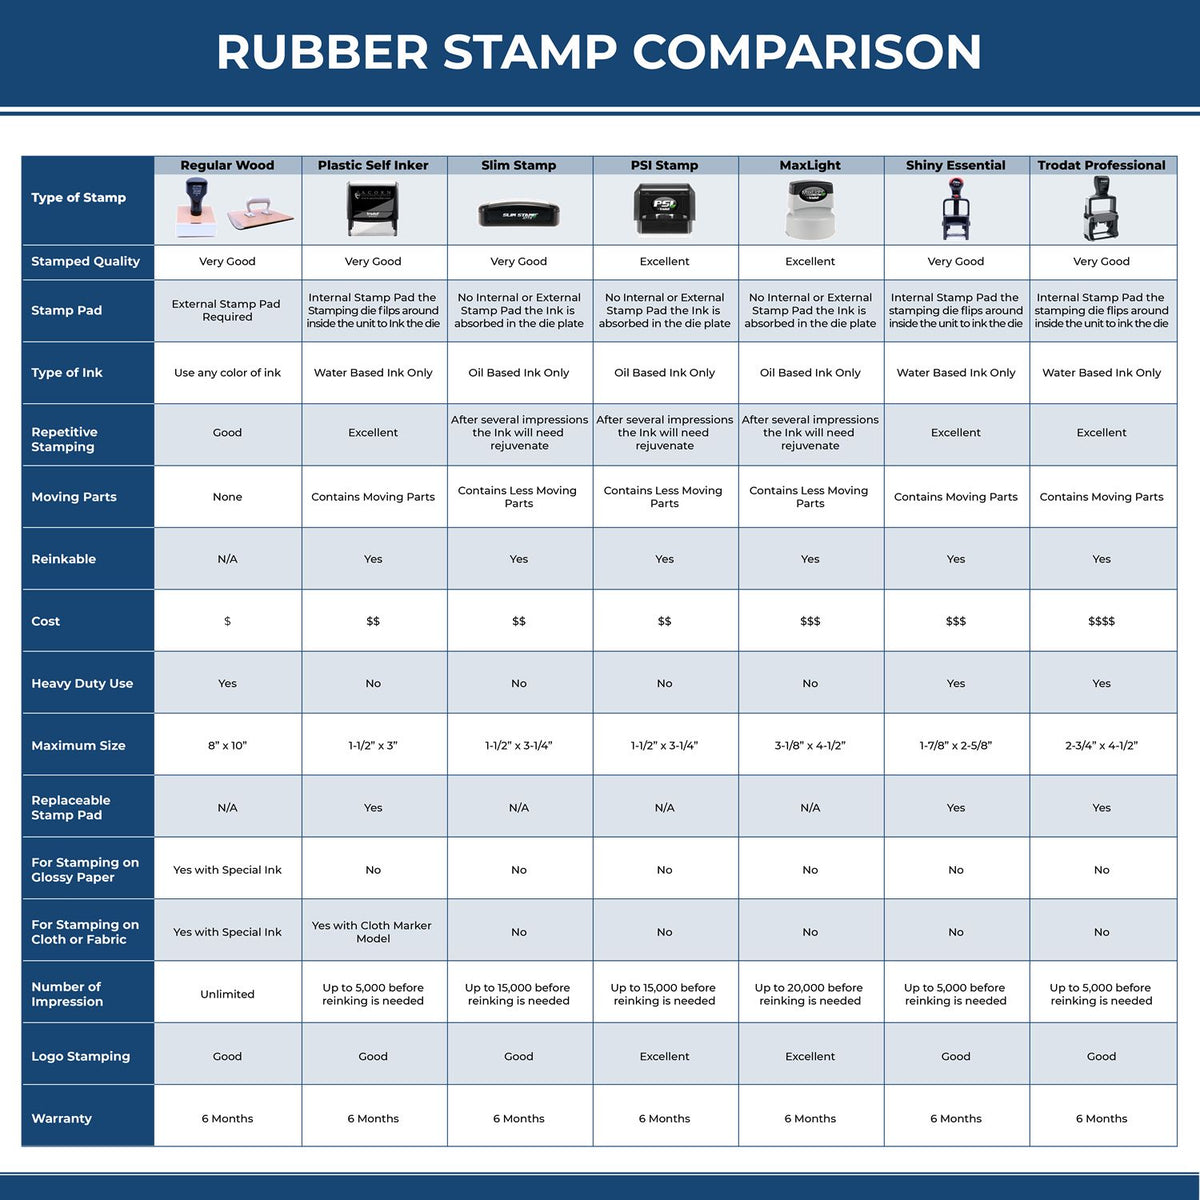 Large Self Inking Trustee Exhibit Stamp 4625S Rubber Stamp Comparison